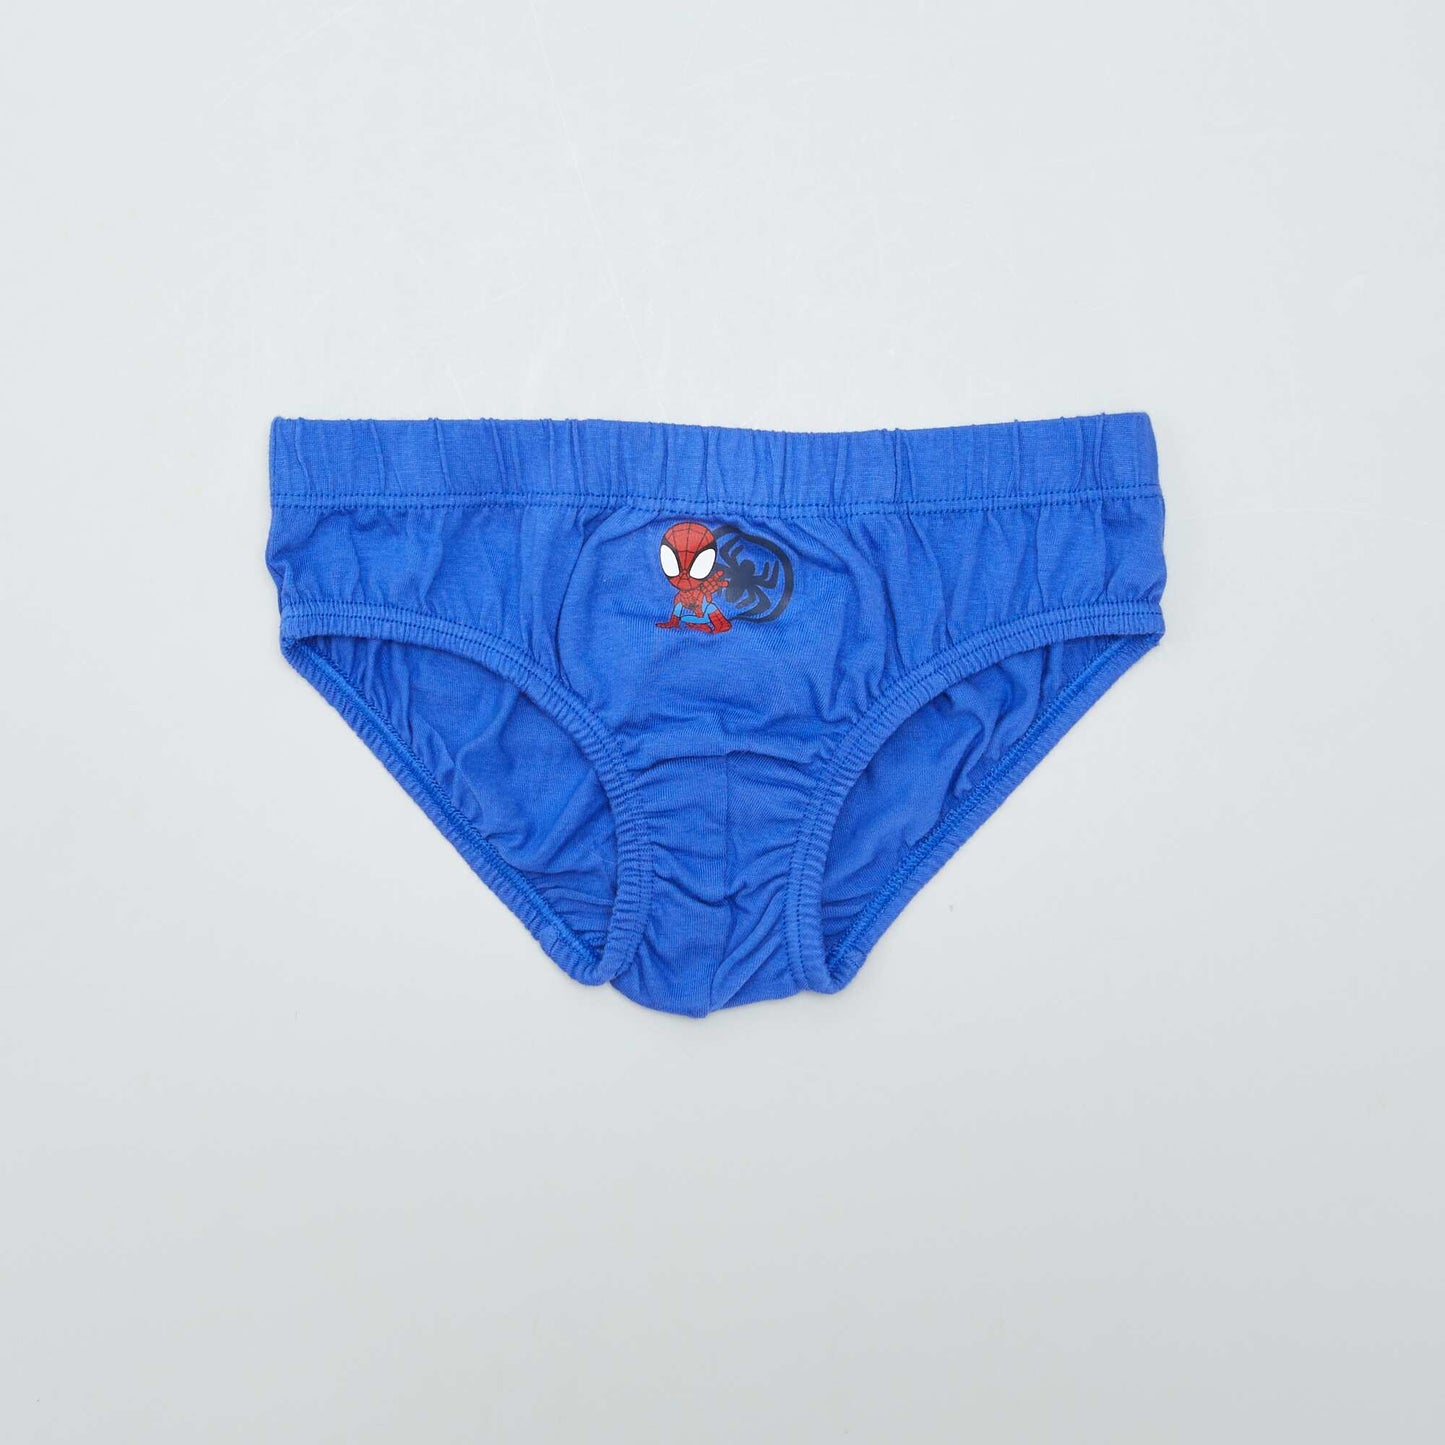 Pack of 5 pairs of 'Spiderman' briefs BLUE